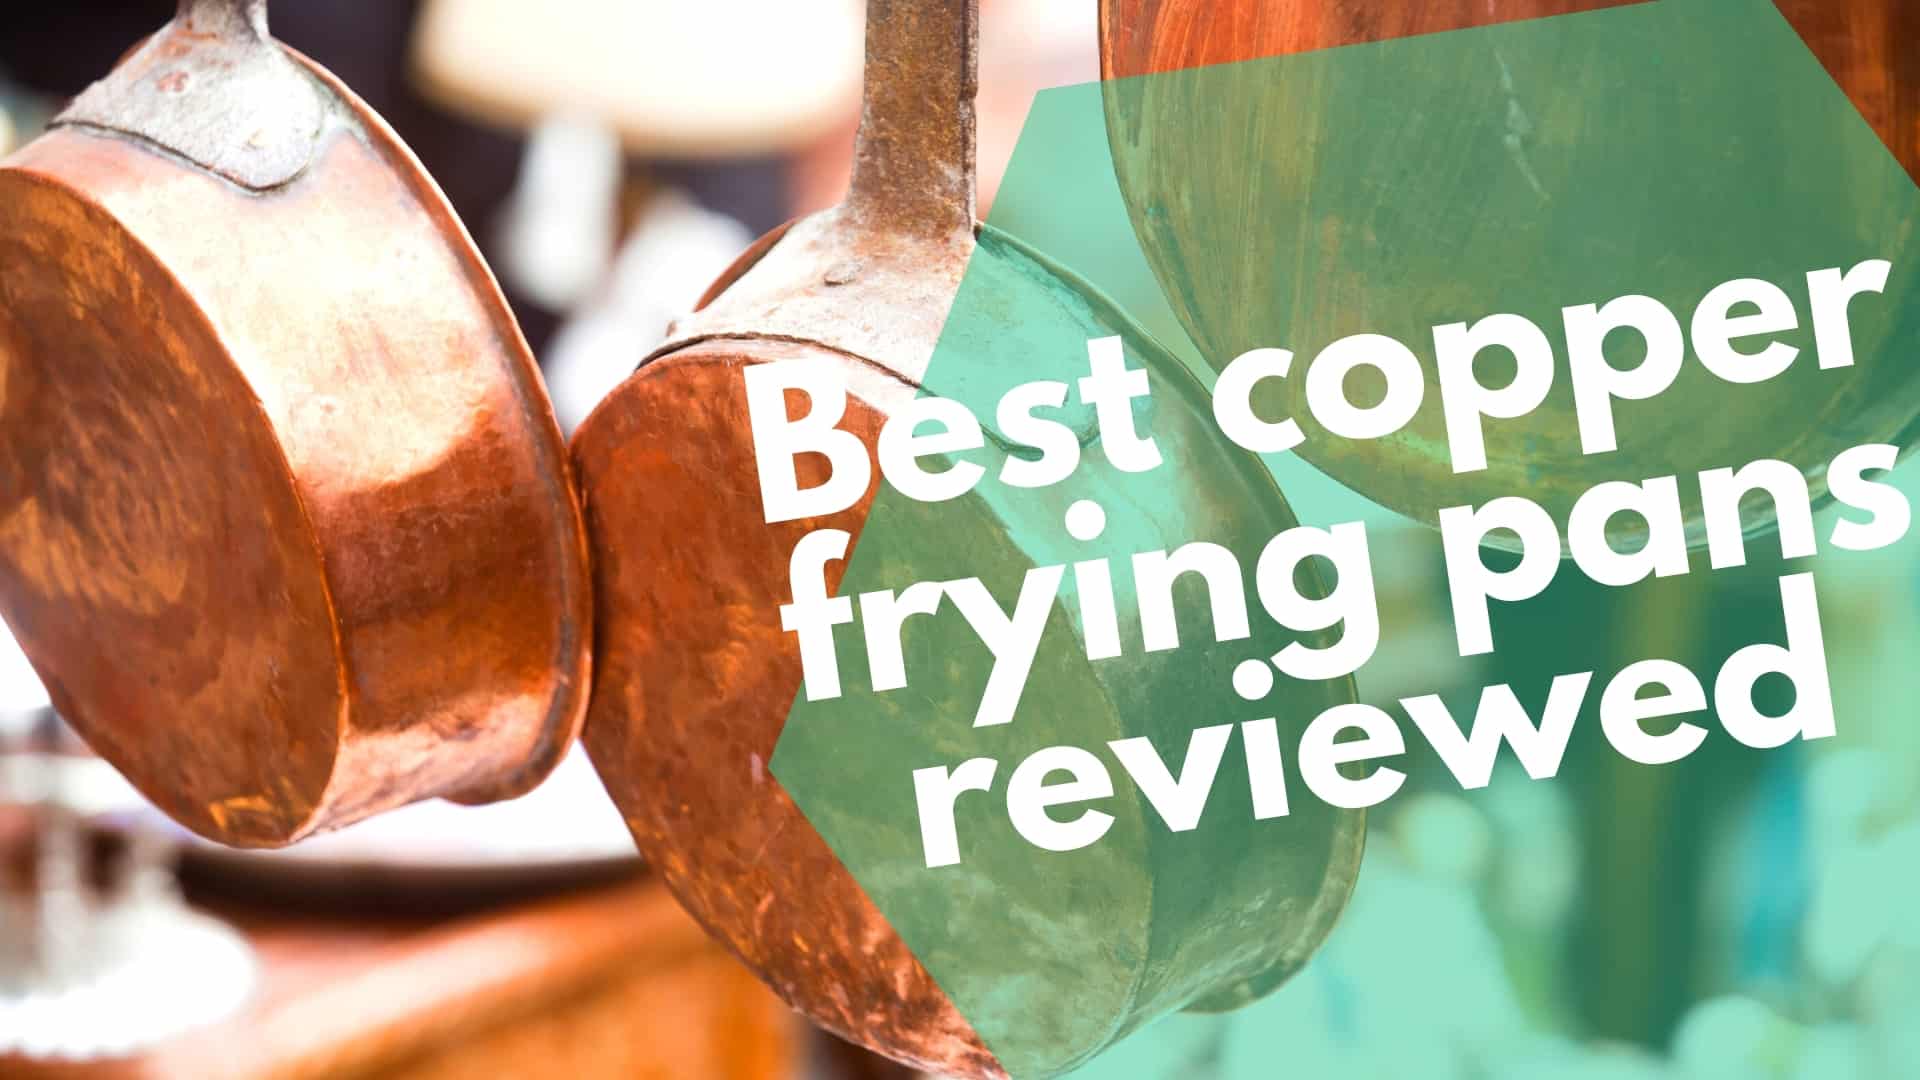 Best copper frying pans reviewed